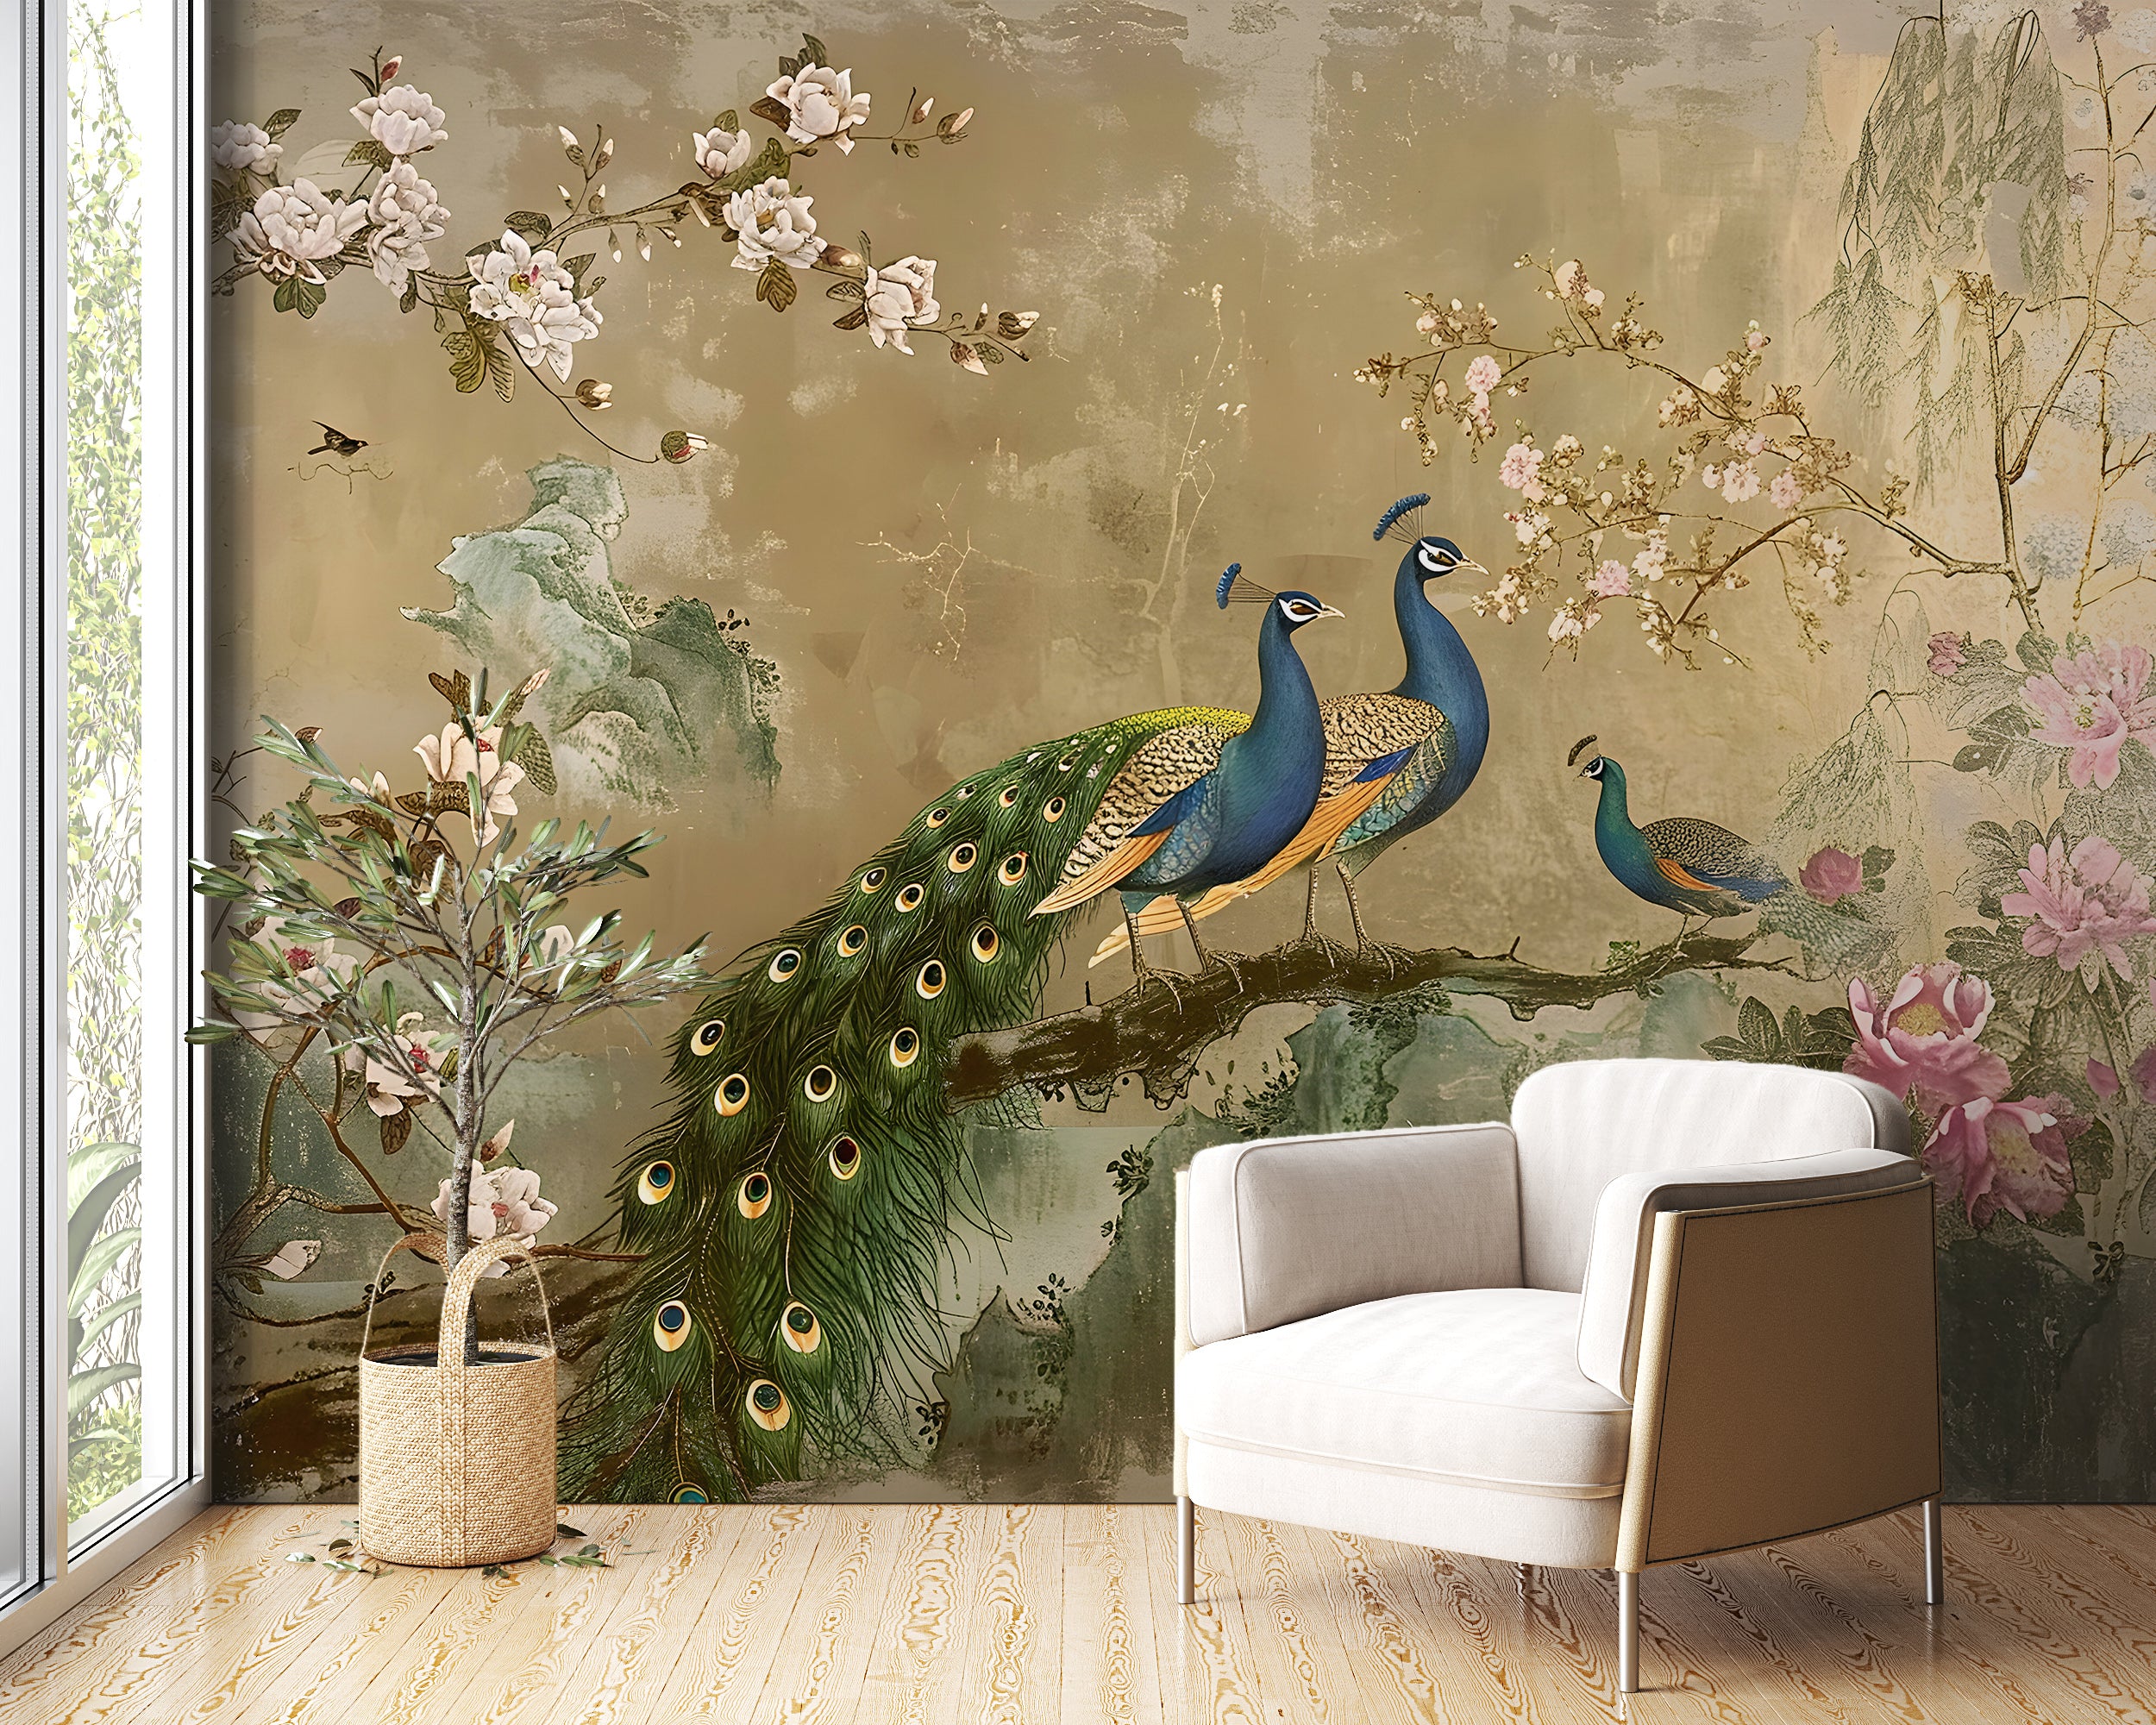 Chinoiserie Wallpaper, Colorful Peacock Wall Mural, Removable Vintage Golden Floral Wallpaper, Peel and Stick Classic Mural With Flowers and Birds